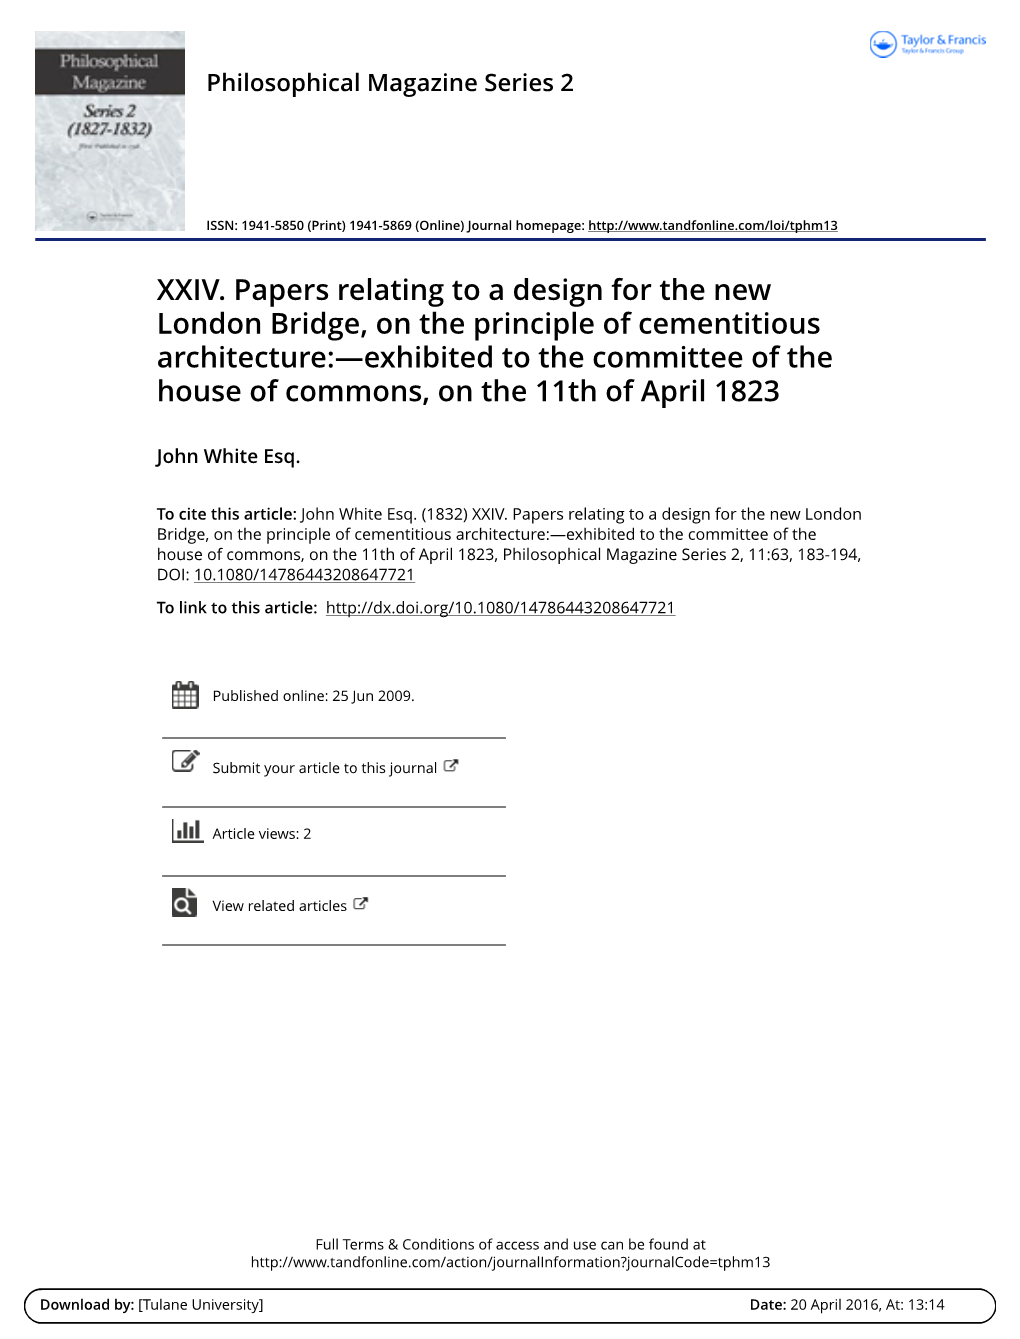 XXIV. Papers Relating to a Design for the New London Bridge, on The